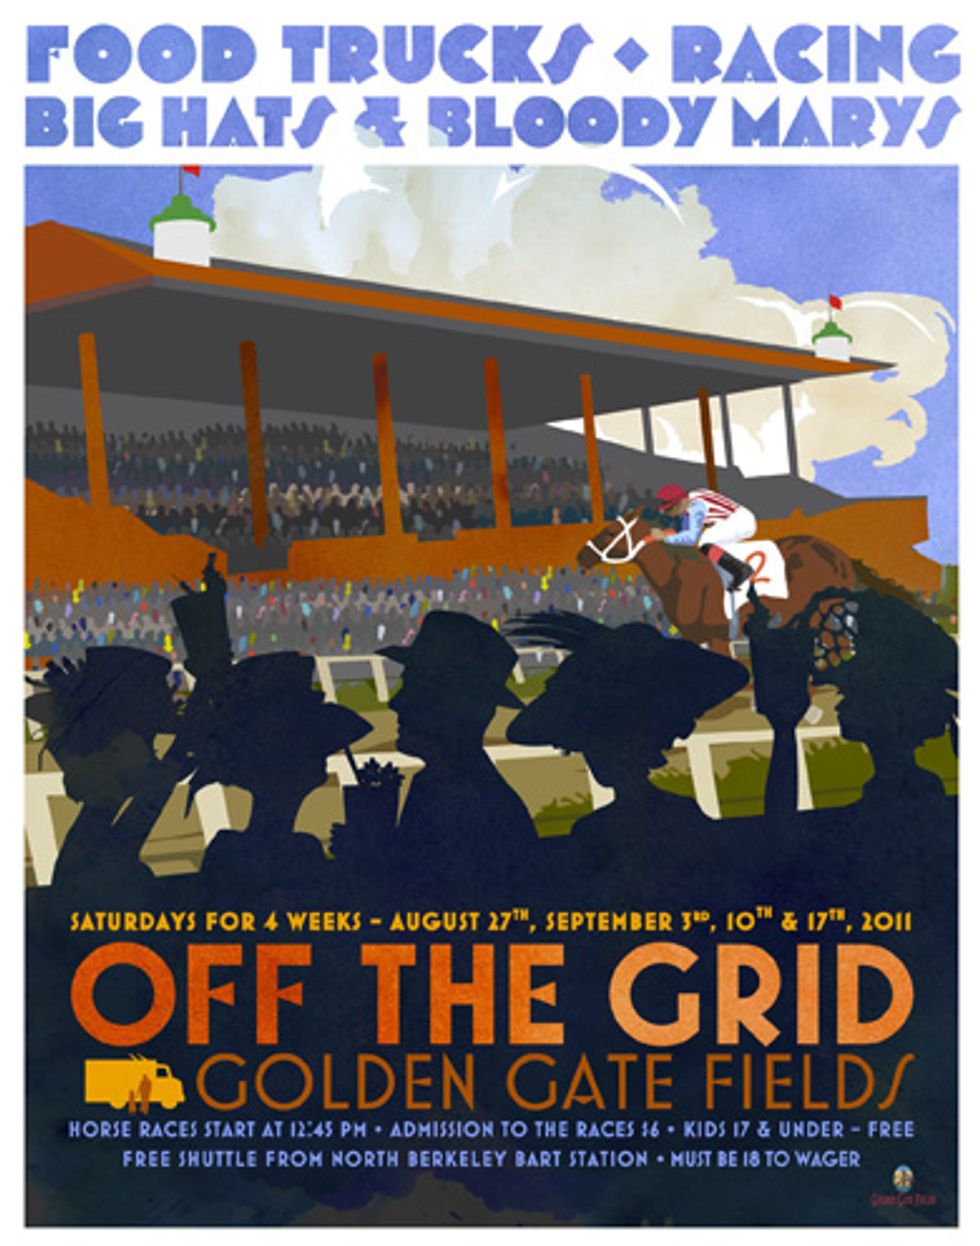 Off The Grid Brings Its Biggest Food Truck Gathering Ever to Golden Gate Fields This Saturday